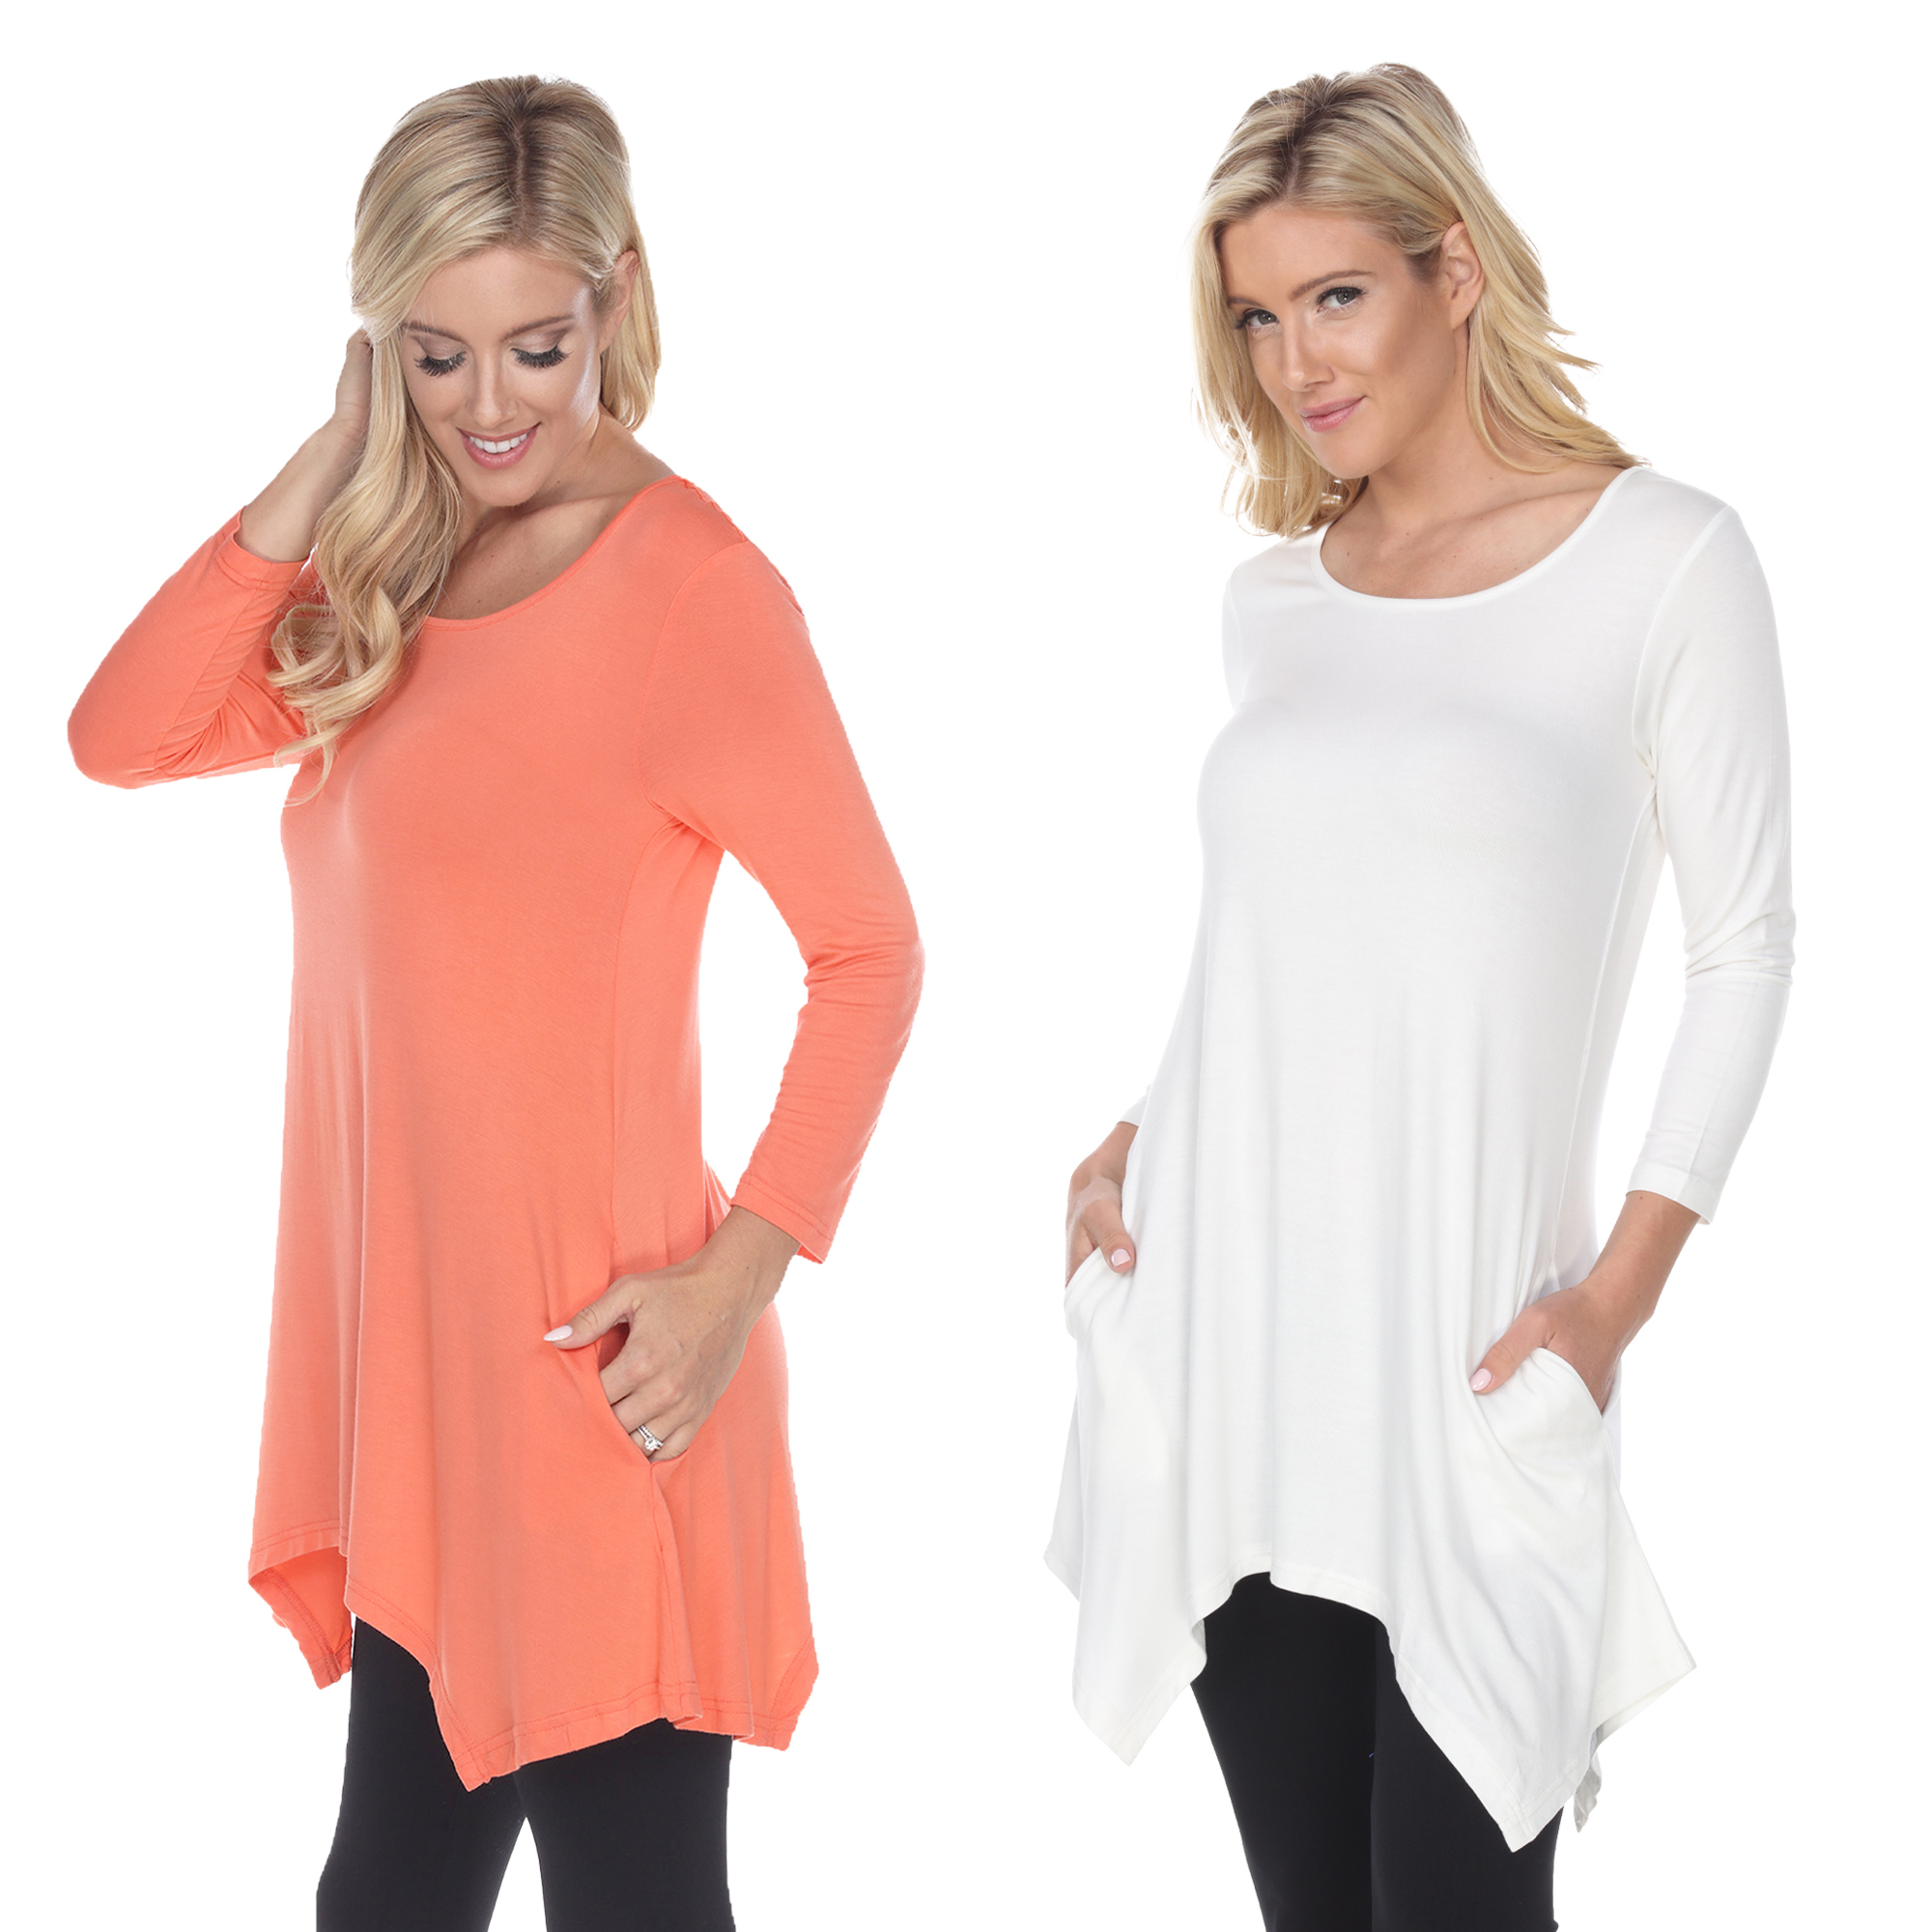 White Mark Women's Pack Of 2 White Tunic Top - White, Coral, X-Large